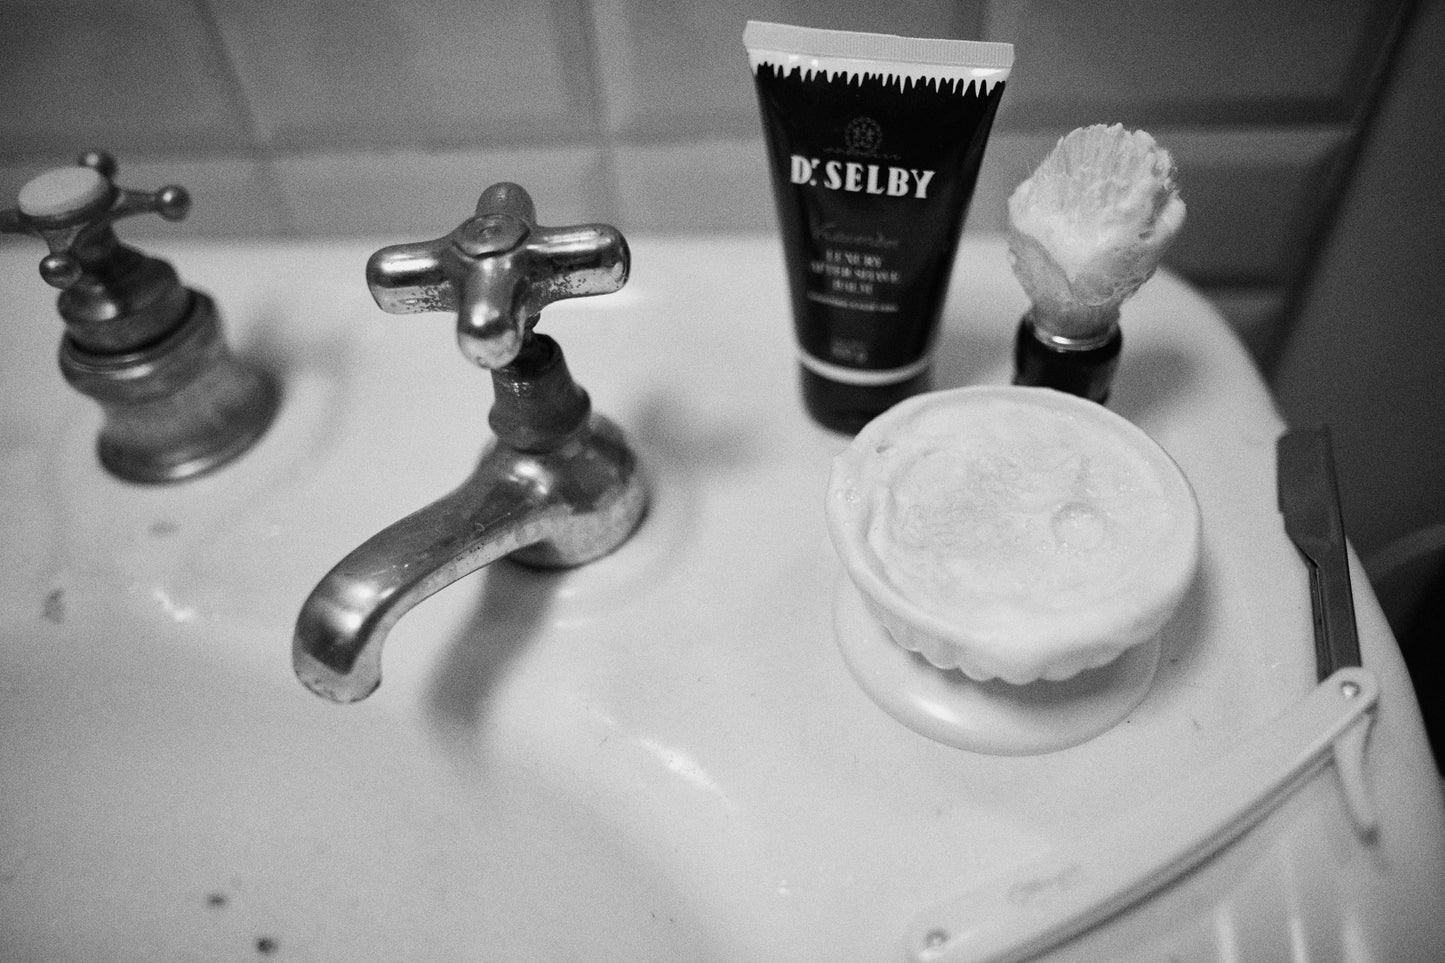 Dr. Selby Luxury 3x Concentrated Shaving Cream